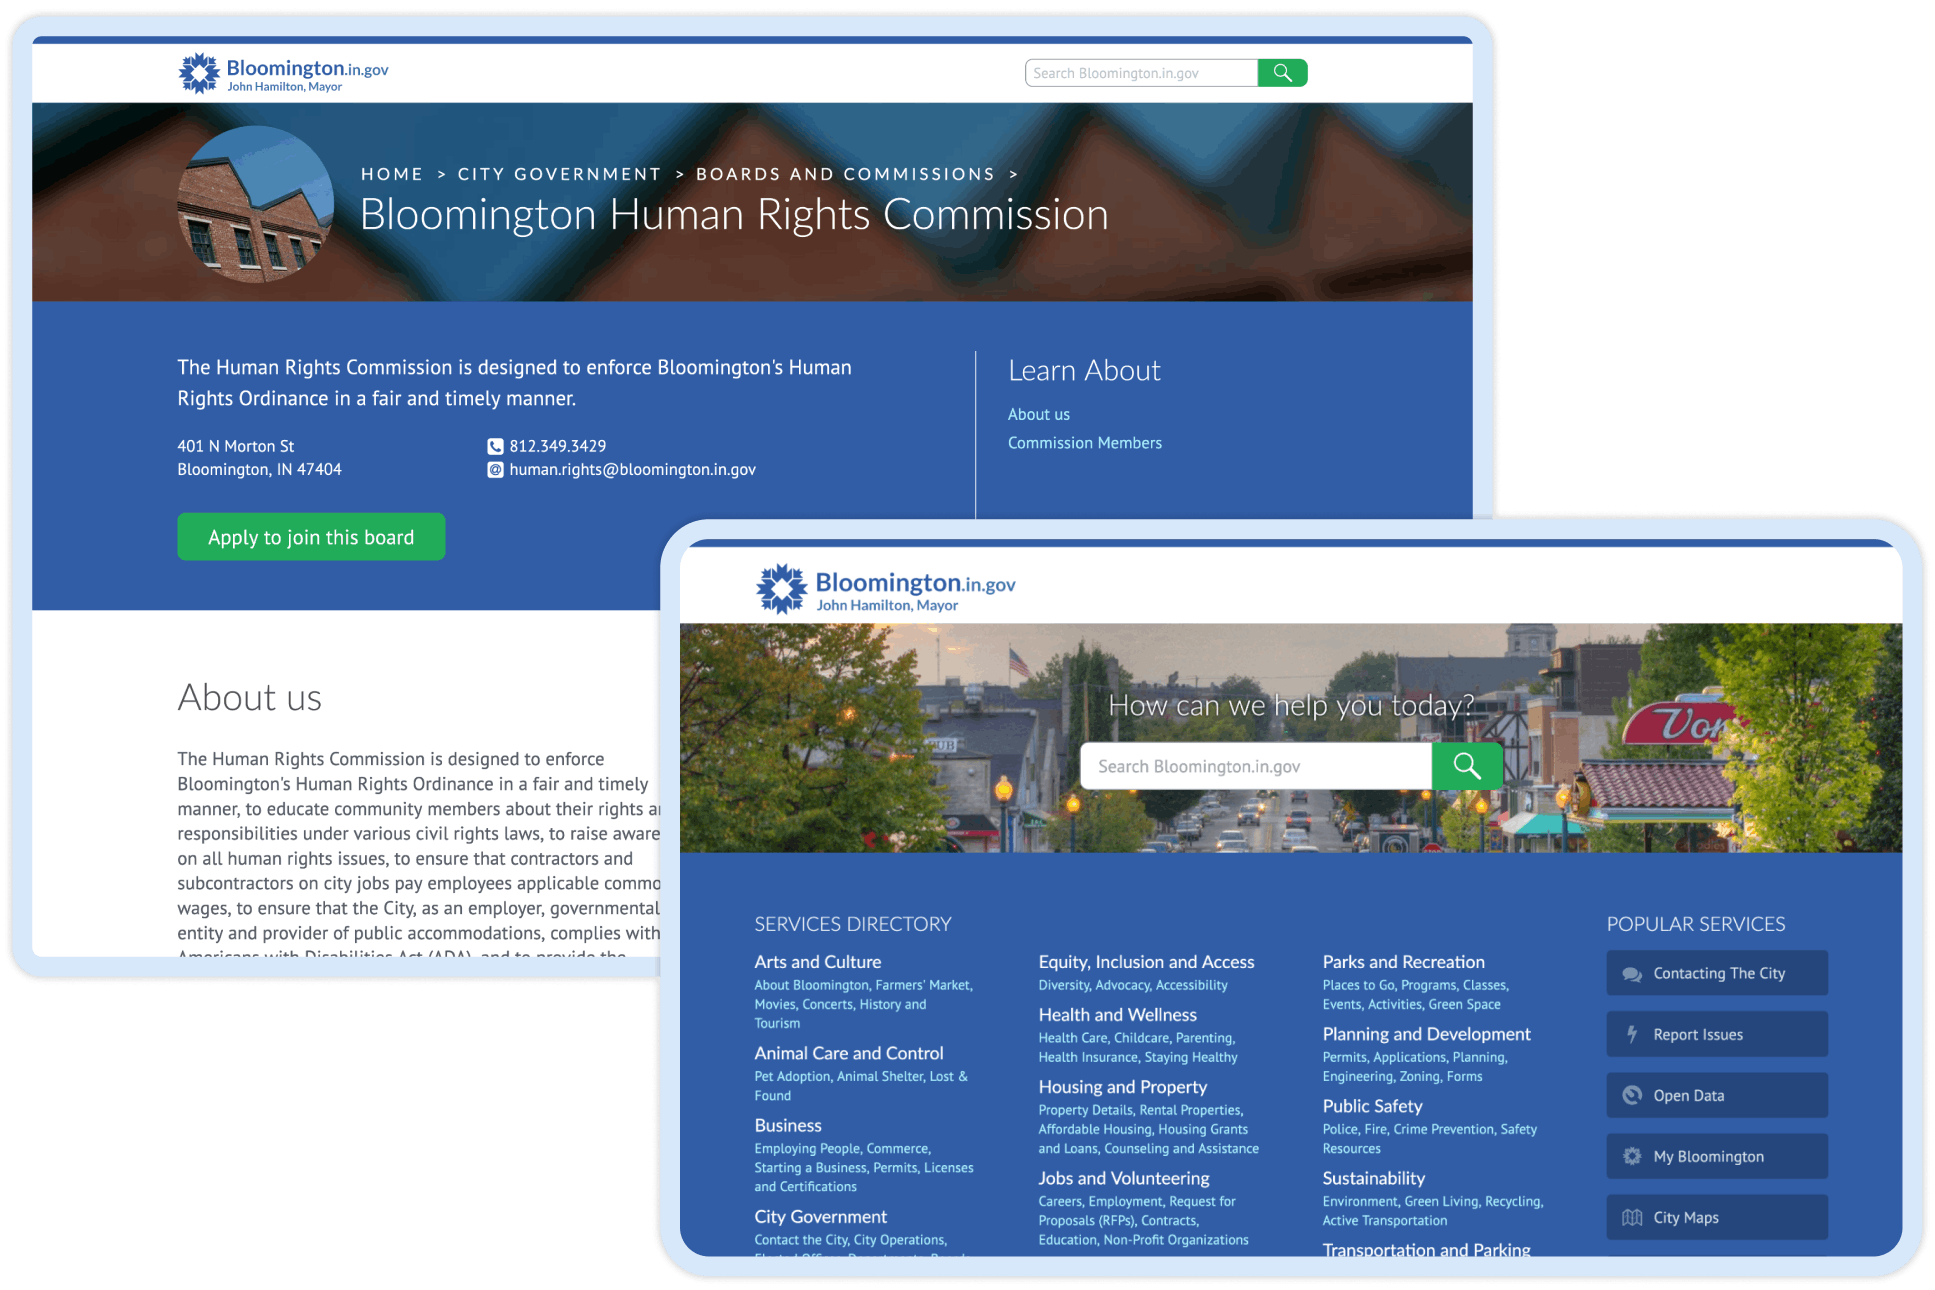 Two screen shots of web pages. One shows a page for the Bloomington Human Rights Commission, and the other shows the City homepage, with a directory of services offered by the City.